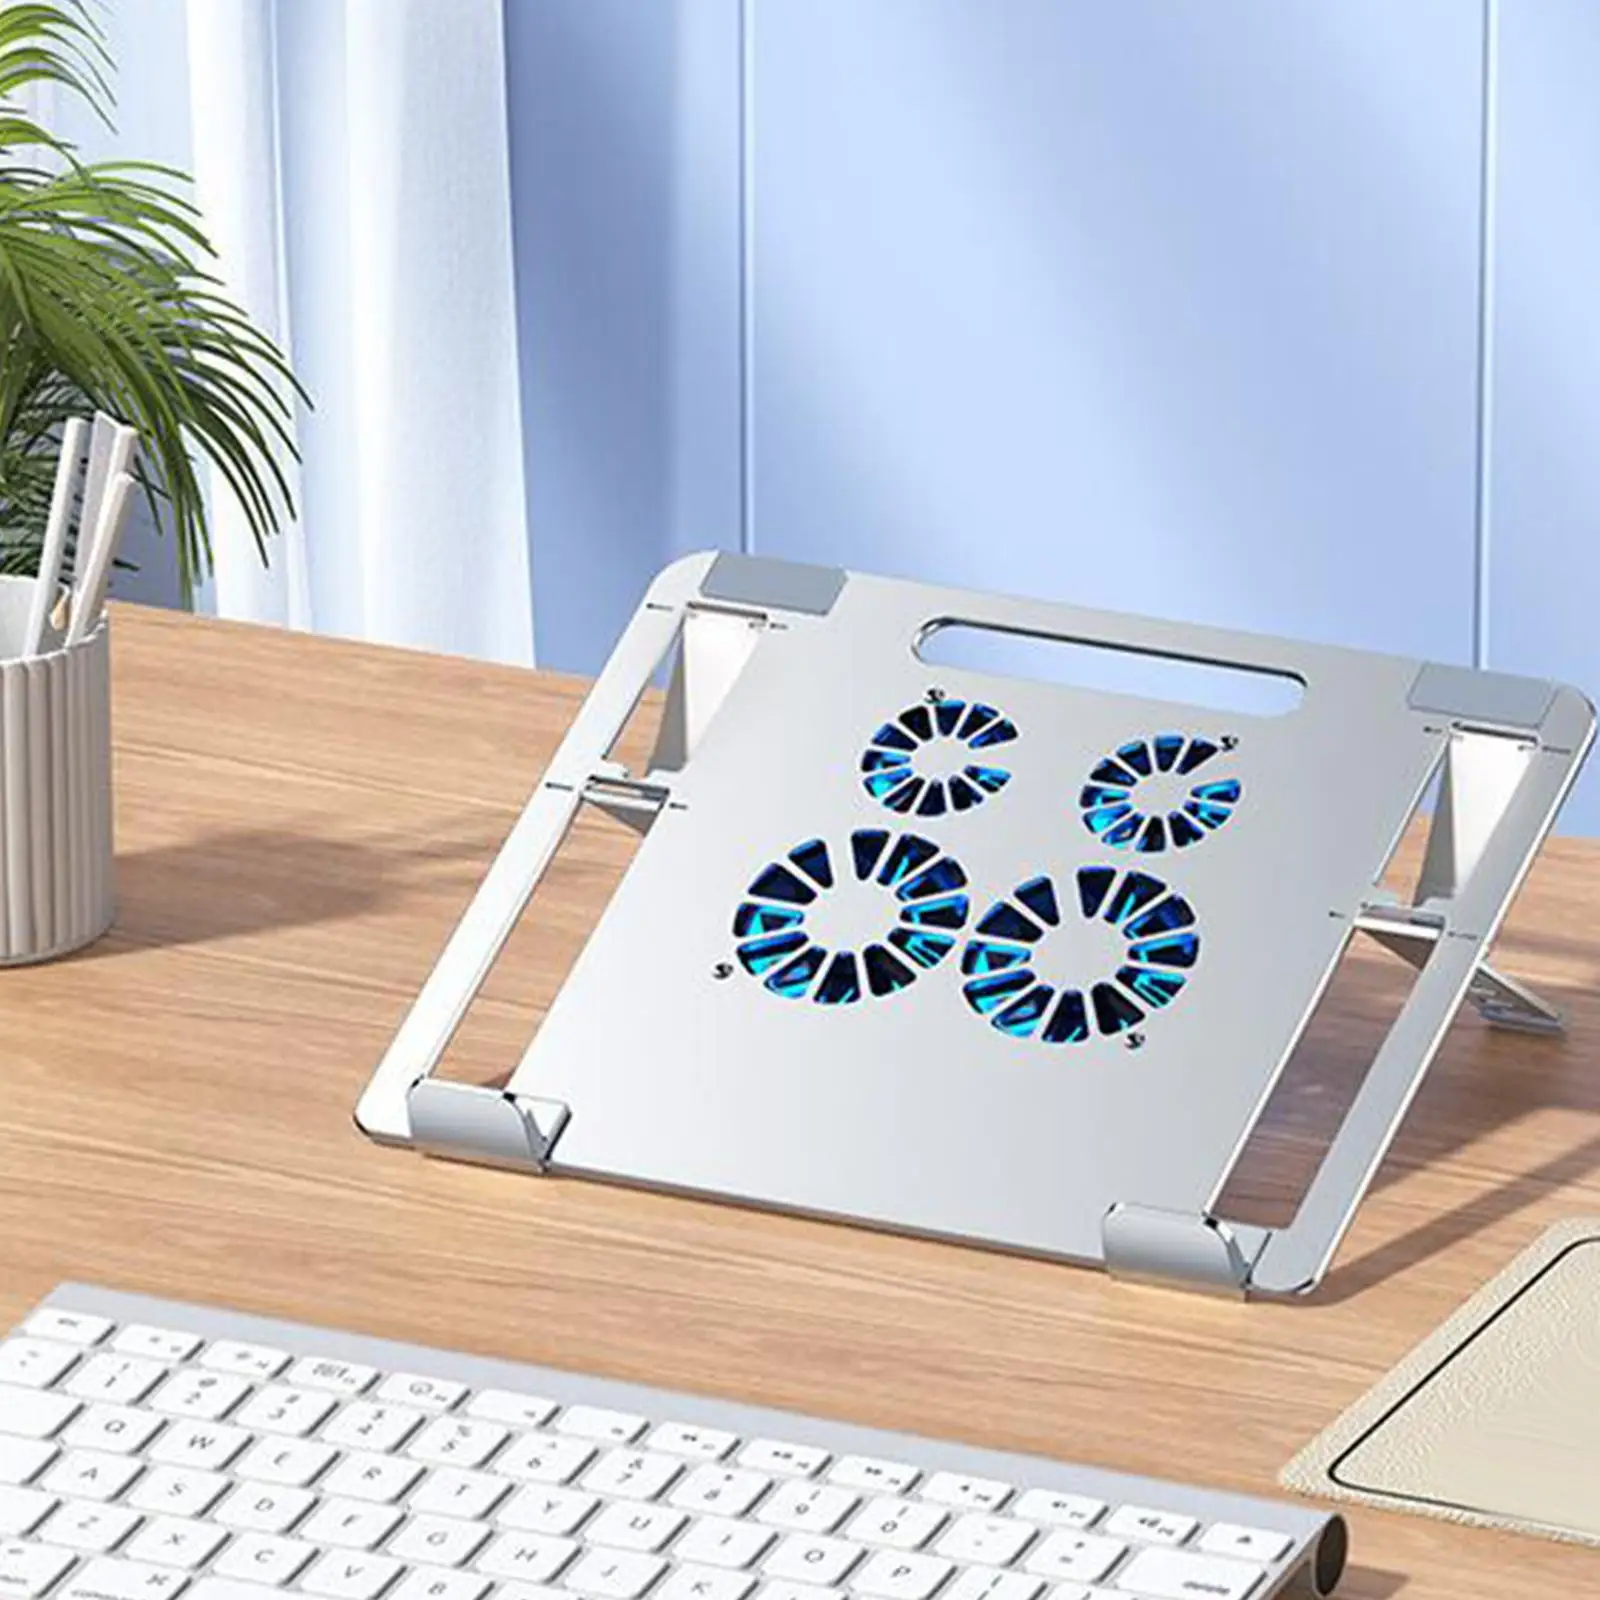 Laptop Stand with Cooling Fan Laptop Cooling Stand Lightweight Foldable Laptop Mount Cooler Portable Laptop Holder for Notebook